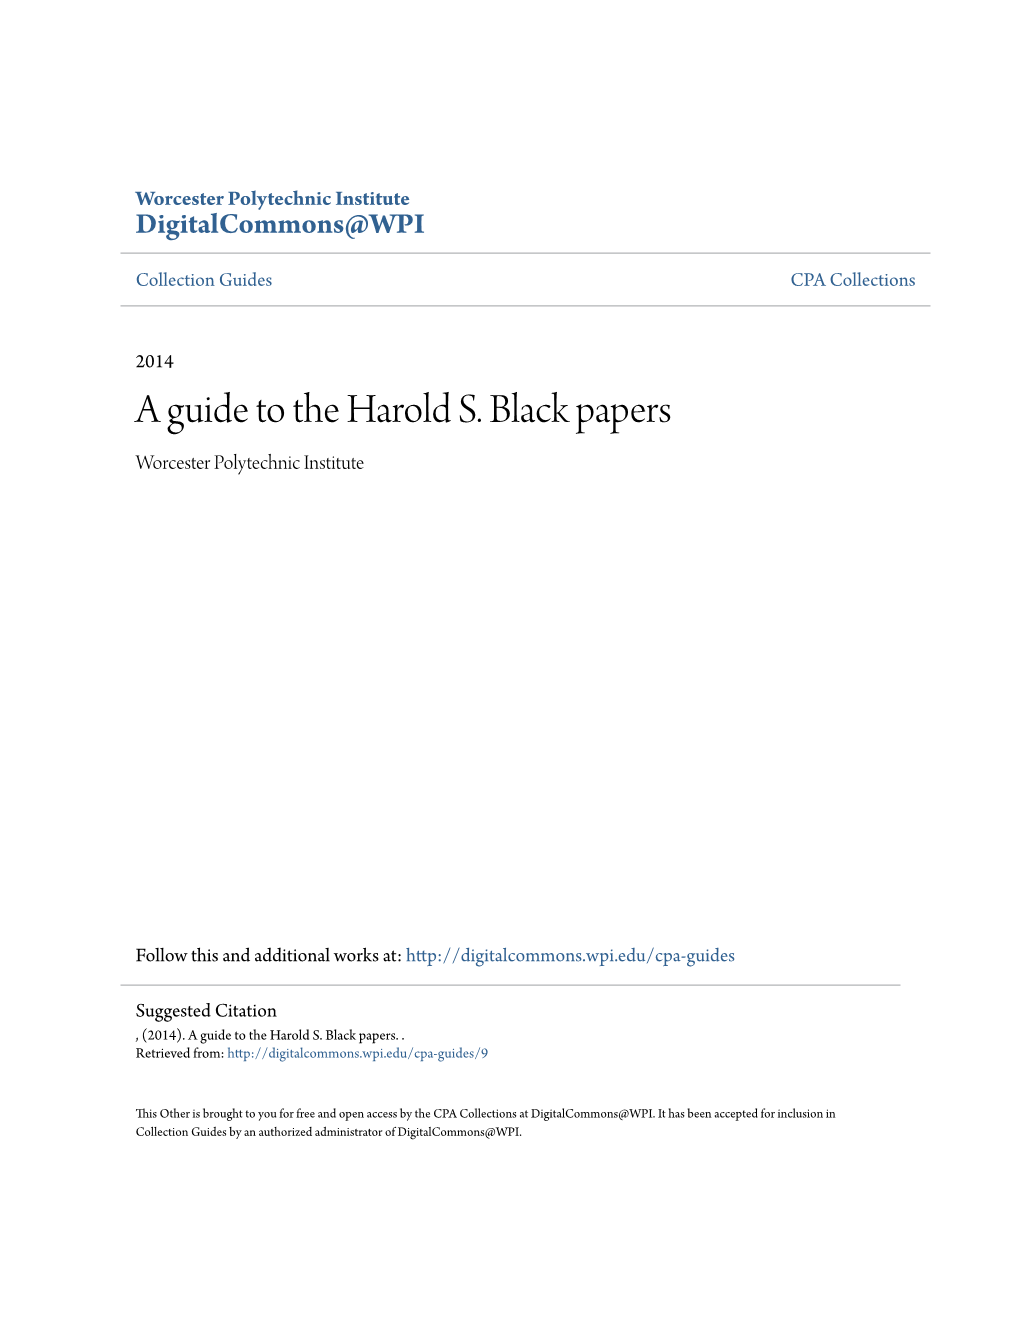 A Guide to the Harold S. Black Papers Worcester Polytechnic Institute